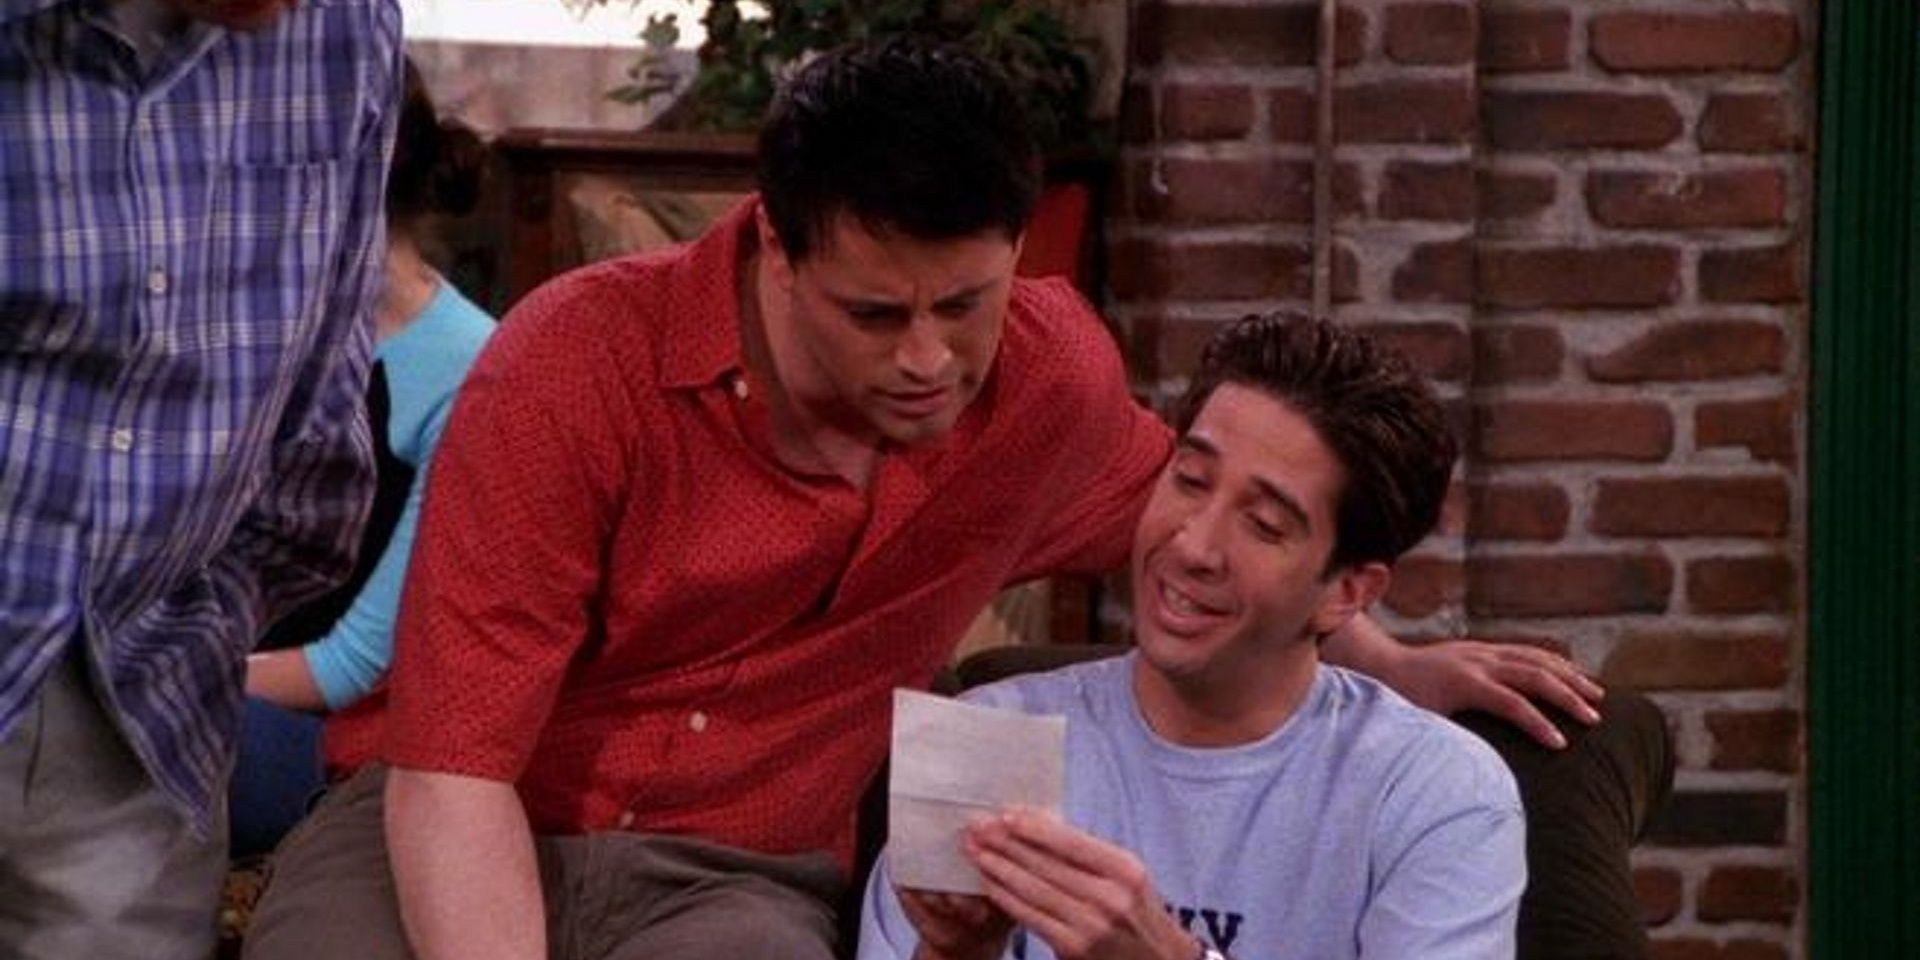 Chandler, Joey and Ross in Central Perk reading vows